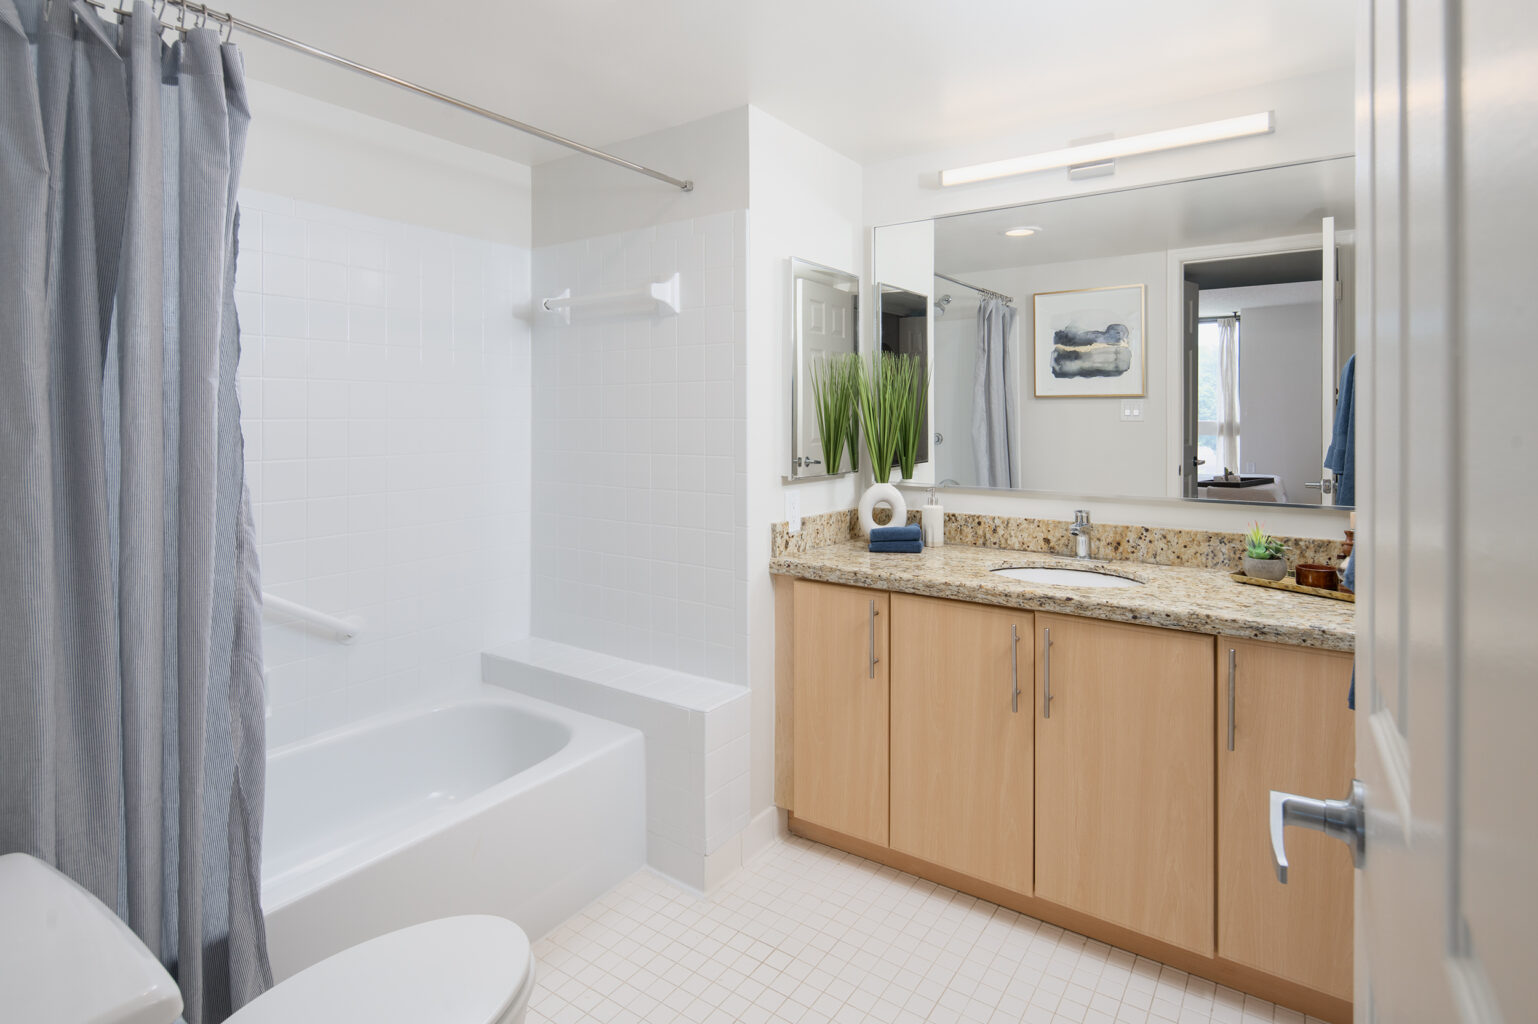 A small bathroom with modern finishes and ample mirrors.